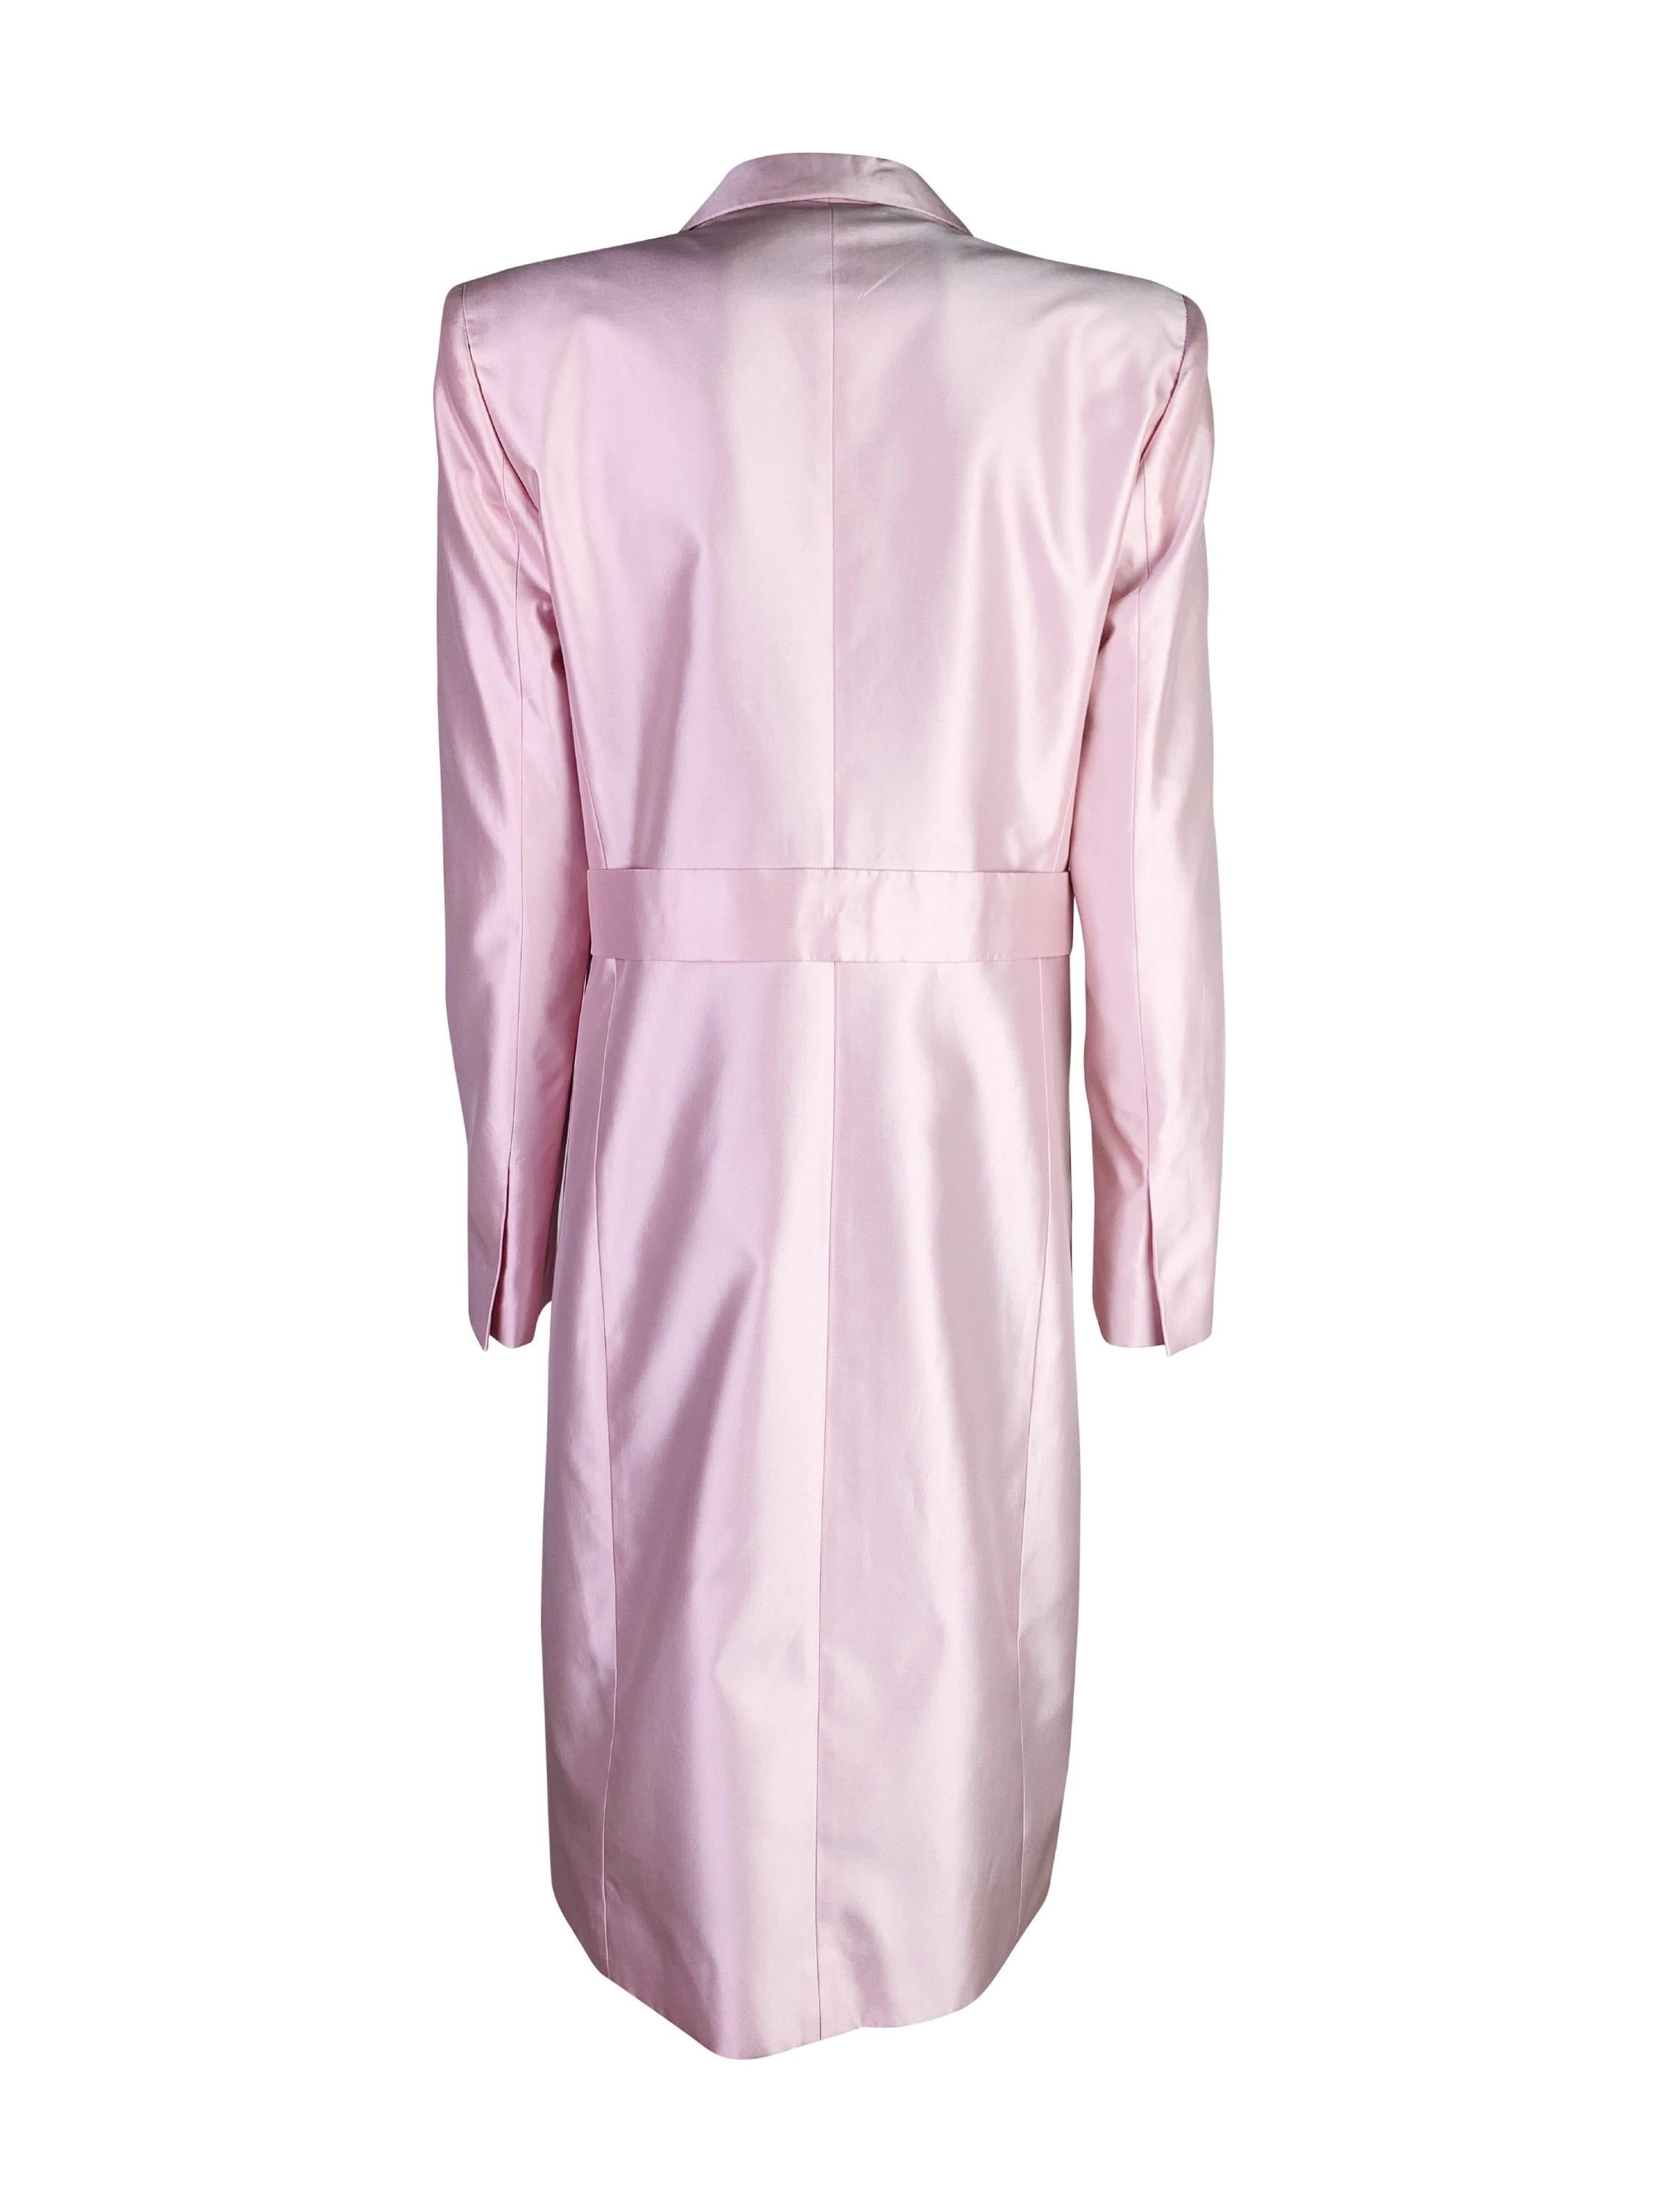 Gucci Spring 1998 Silk Coat in Pink In Excellent Condition For Sale In Prague, CZ